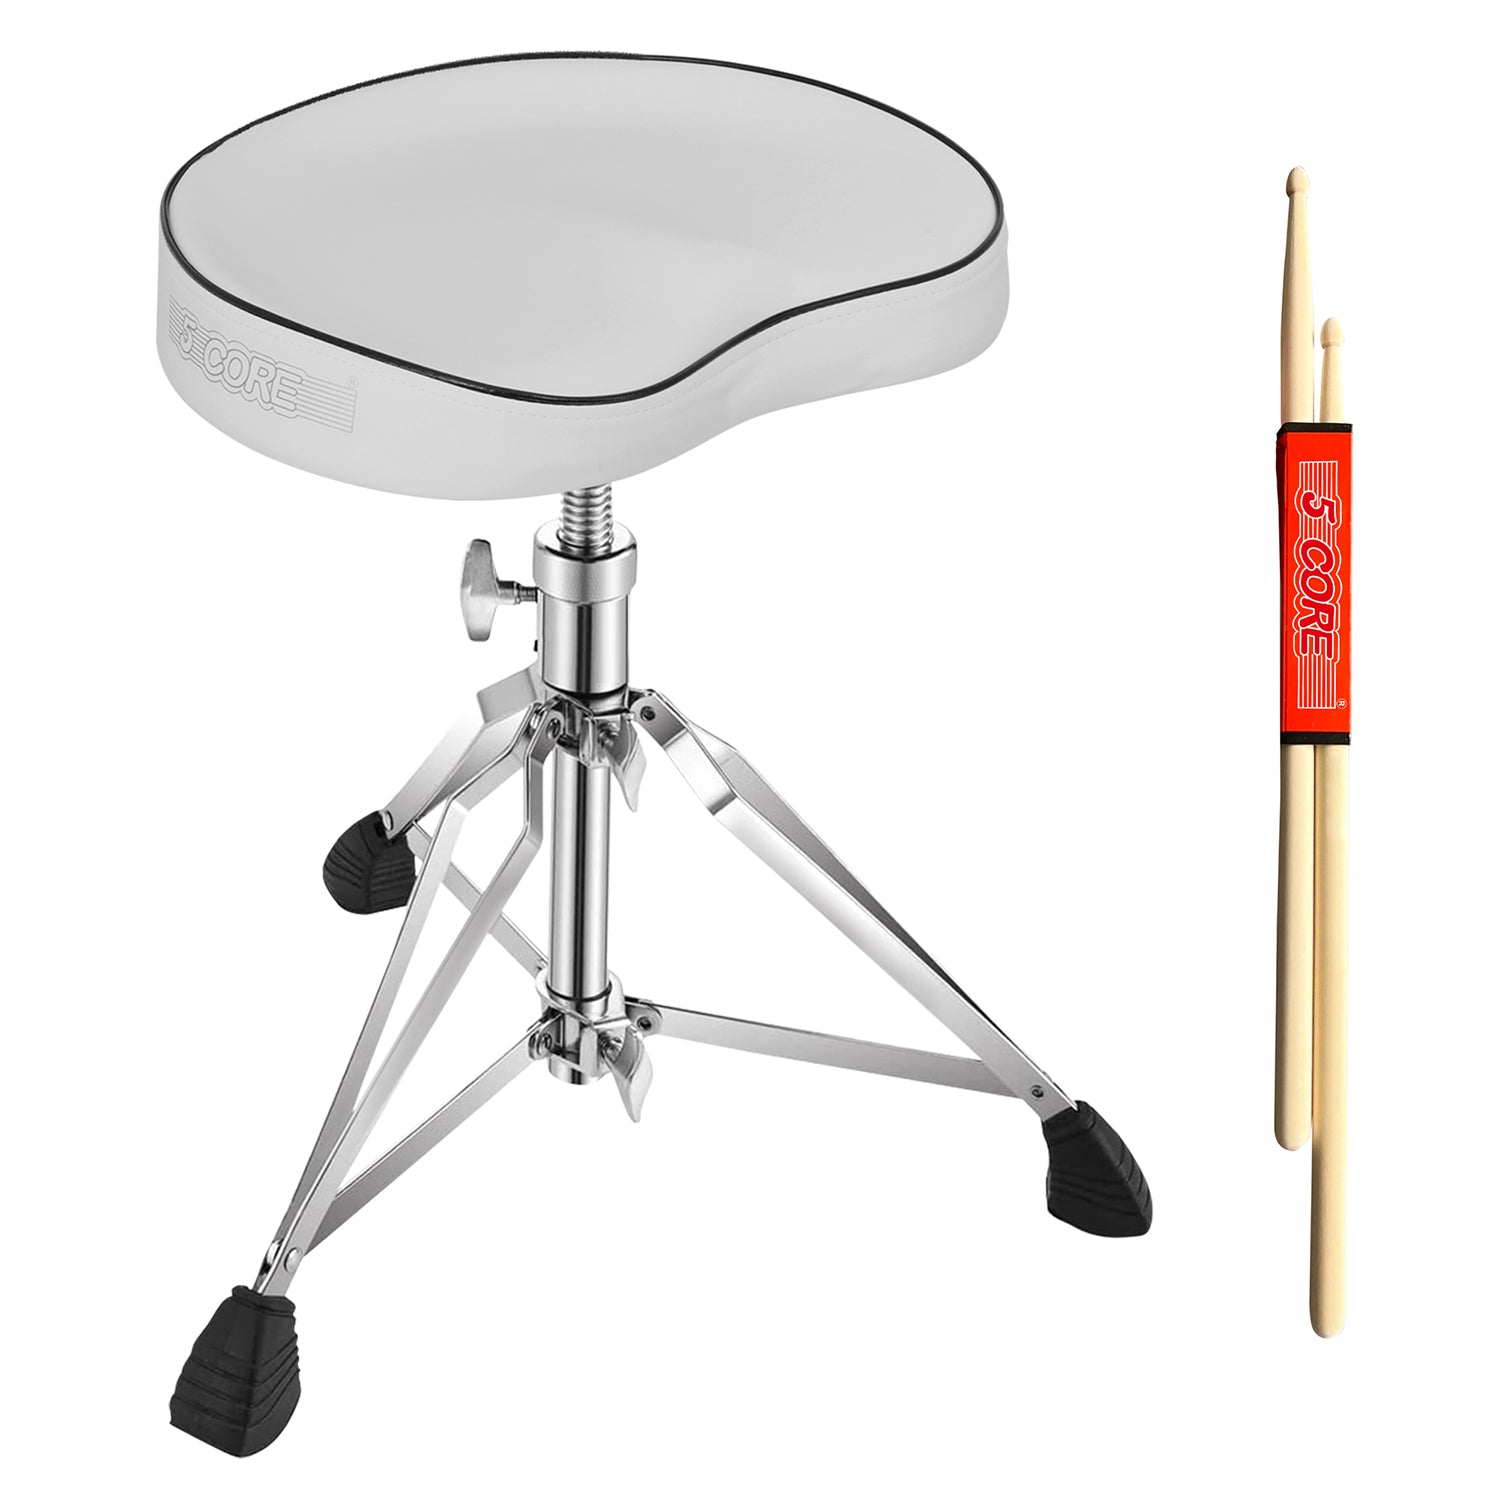 5 Core Drum Throne Comfortable Padded Stool Height Adjustable Music DJ Chair Heavy Duty Seat  WHITE